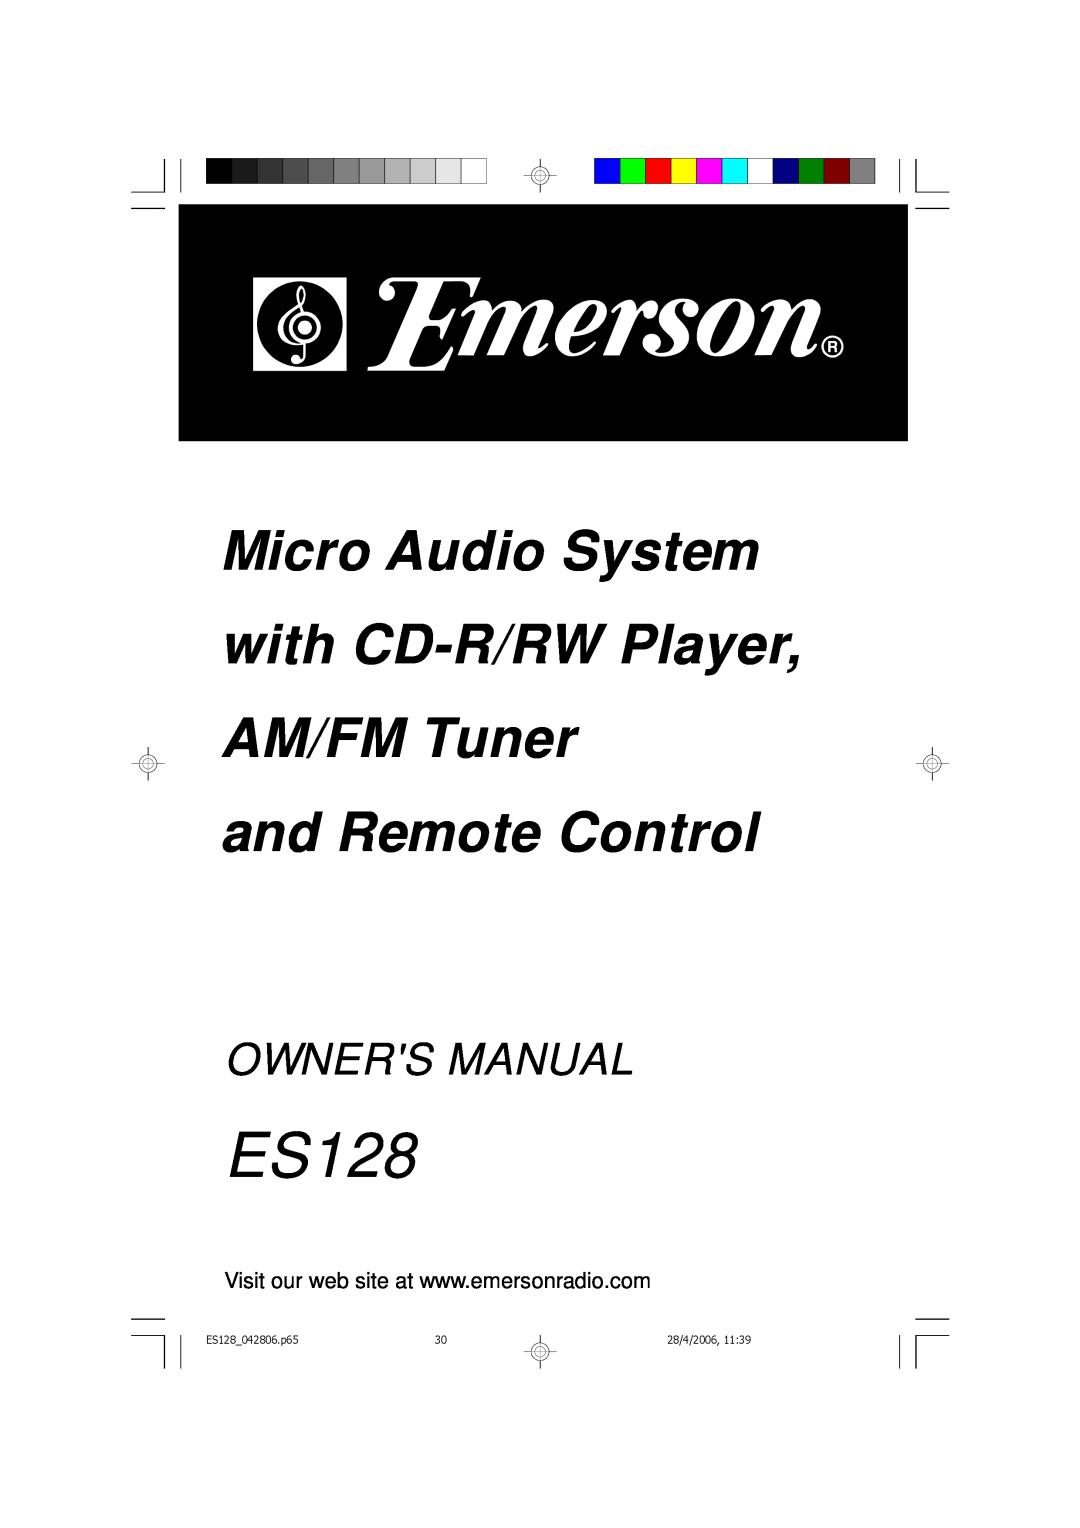 Emerson owner manual Micro Audio System with CD-R/RWPlayer AM/FM Tuner, and Remote Control, ES128 042806.p65, 28/4/2006 